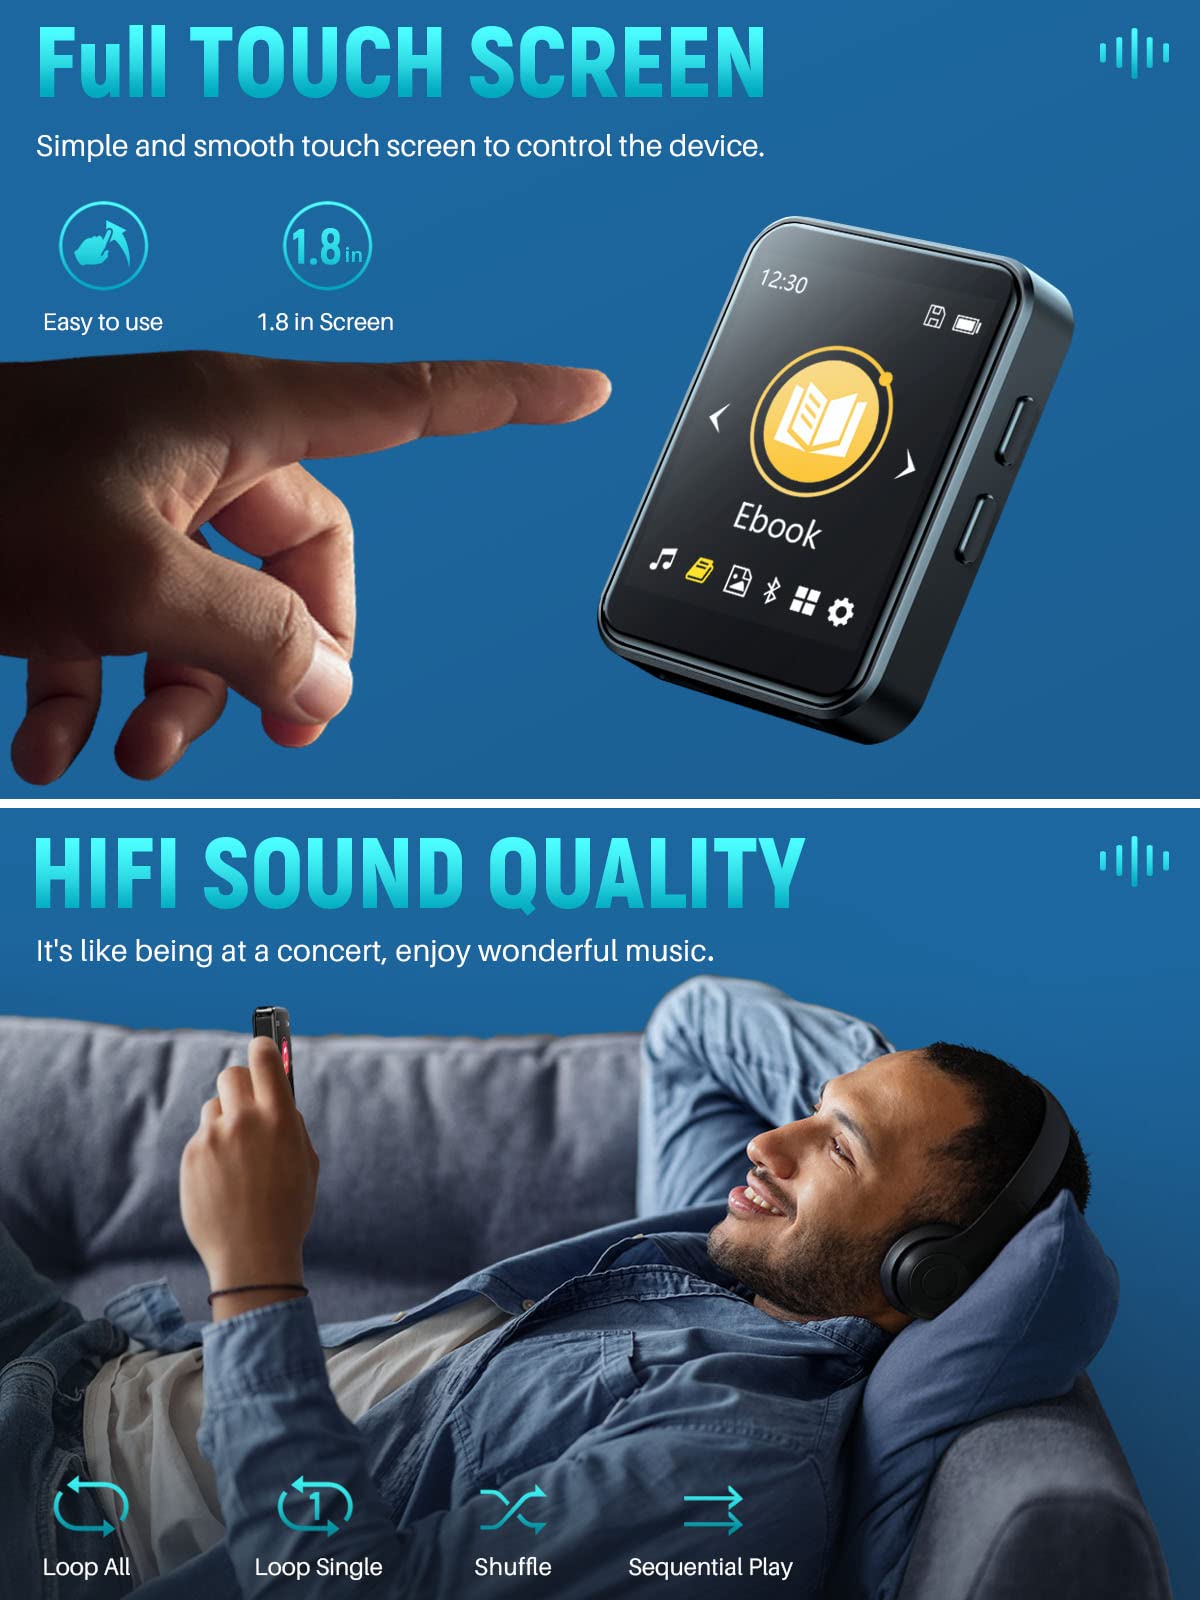 DONEST 64GB MP3 Player Bluetooth 5.2 Touch Screen Music Player with Speakers Lossless Sound Quality mp3 with FM Radio Recording E-Book 1.8 inch Screen Includes Back Clip/Player Case/Earphone/TF Card